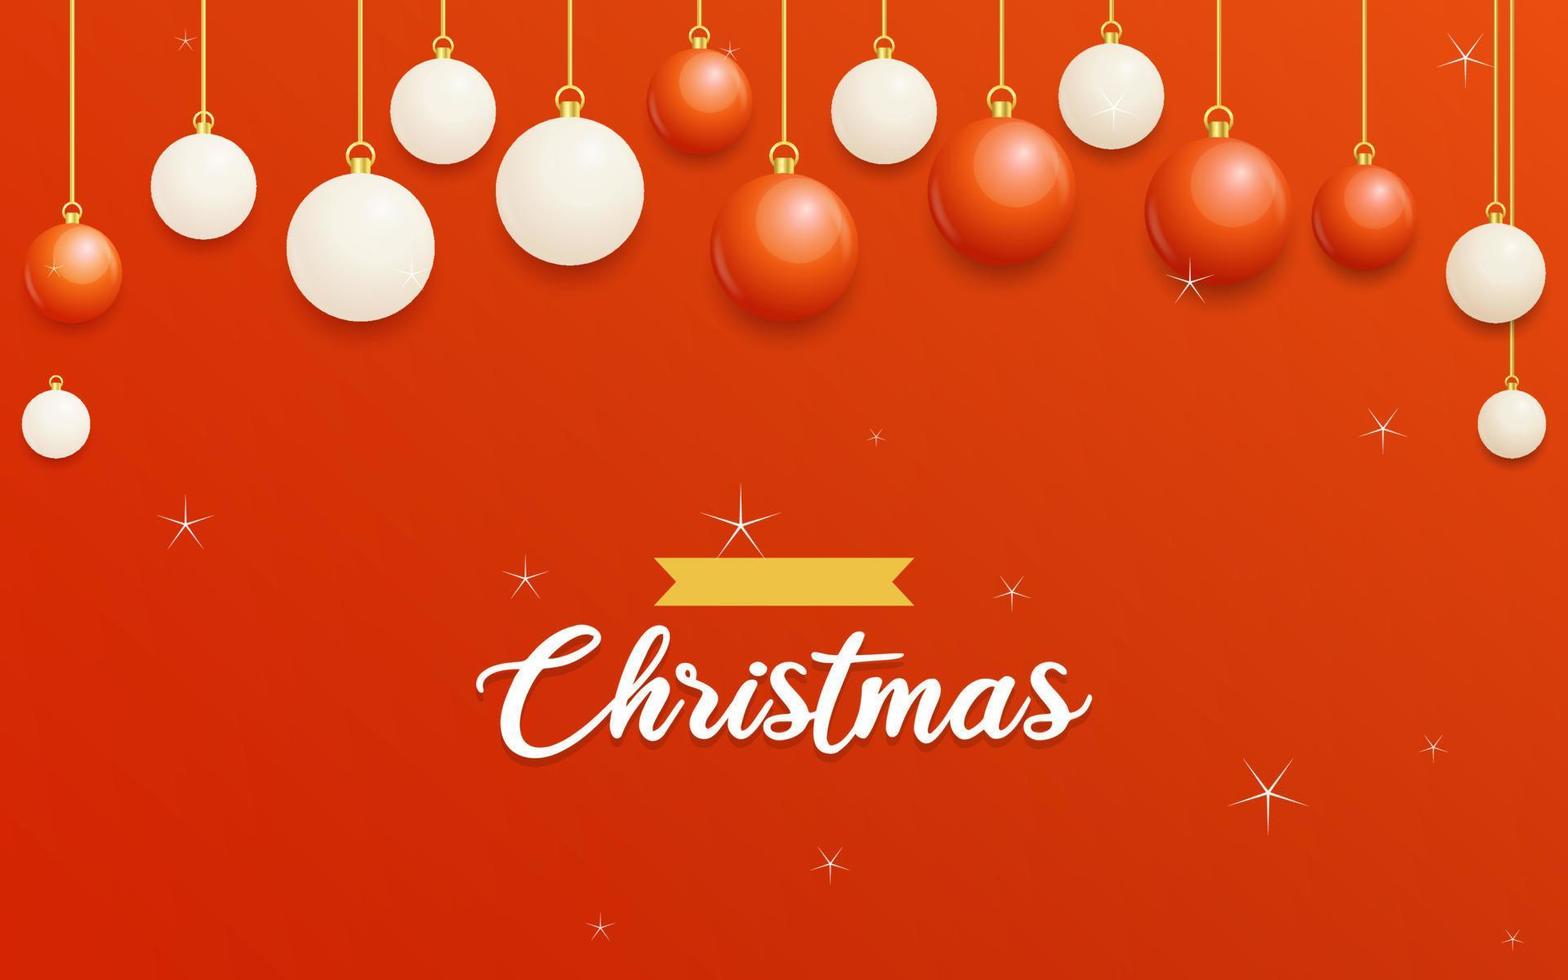 Merry Christmas Red Background with white and Red Hanging balls. Horizontal Christmas posters. greeting cards vector